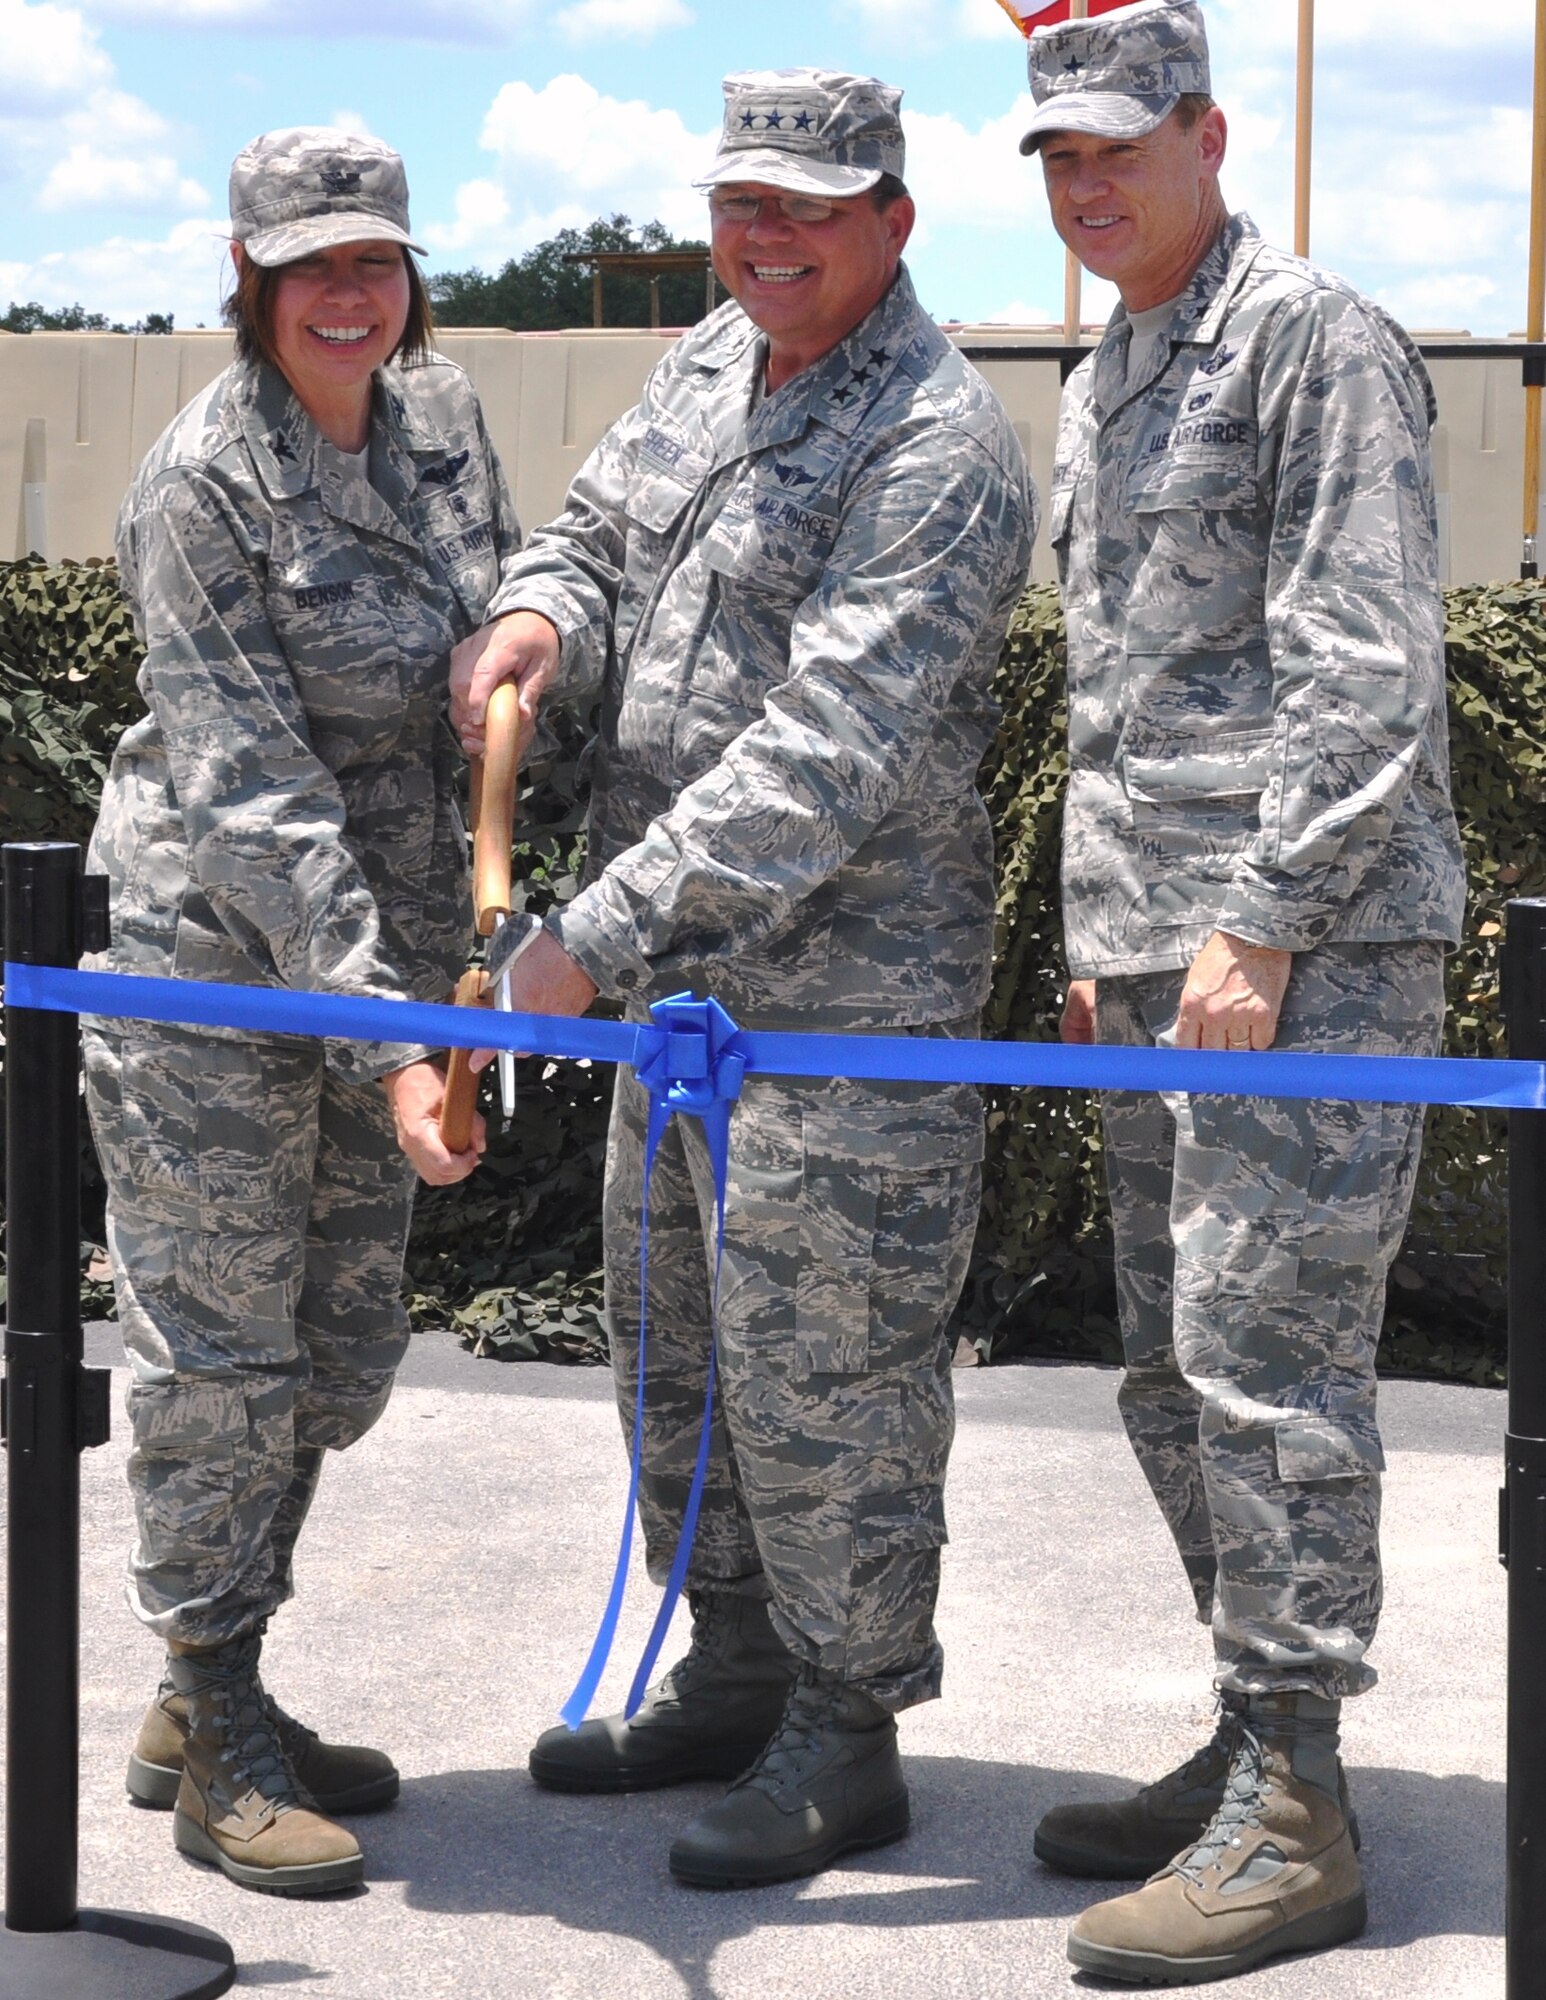 Air Force Col. Lista Benson (left), 882nd Training Group commander; Lt. Gen. (Dr.) Charles Green (center), U.S. Air Force Surgeon General; and Air Force Brig. Gen. Darryl W. Burke, 82nd Training Wing commander, cut the ceremonial ribbon on the new Medical Readiness Training Center at Camp Bullis Friday.  (U.S. Army photo/Steve Elliot)